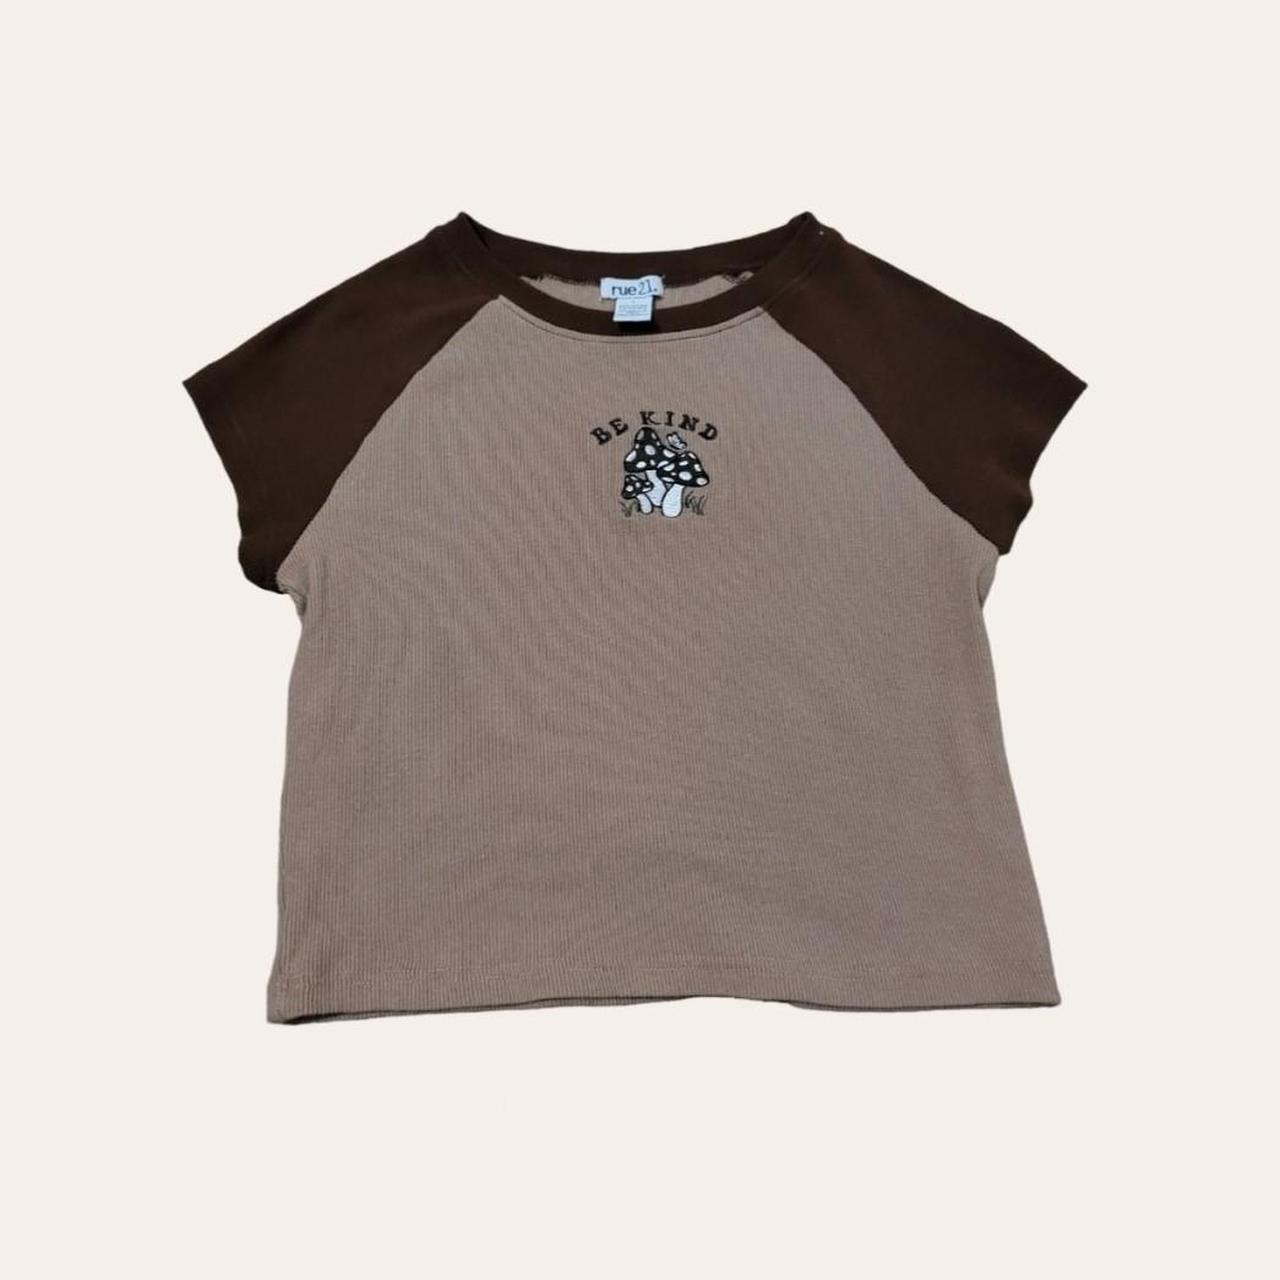 Rue 21 Women's Brown and White Crop-top